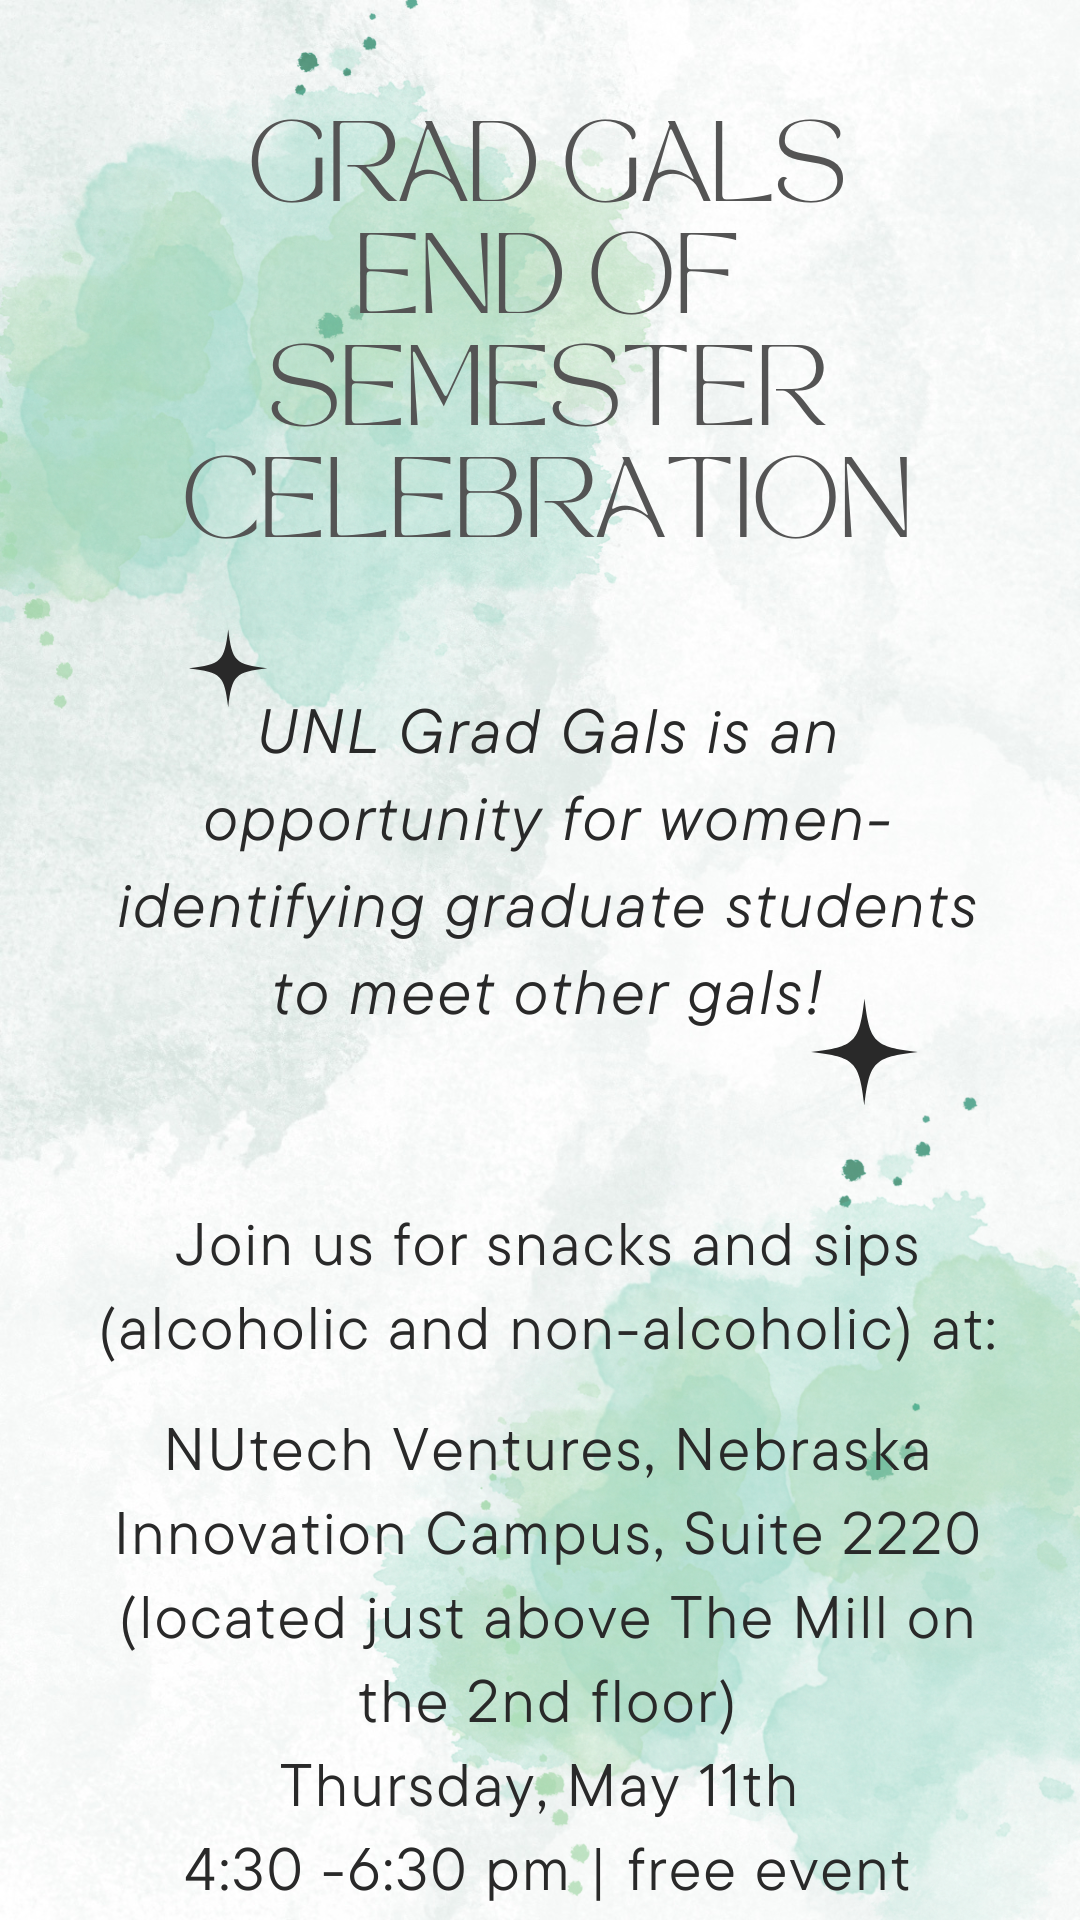 Grad Gals End of Semester Celebration will take place May 11th.